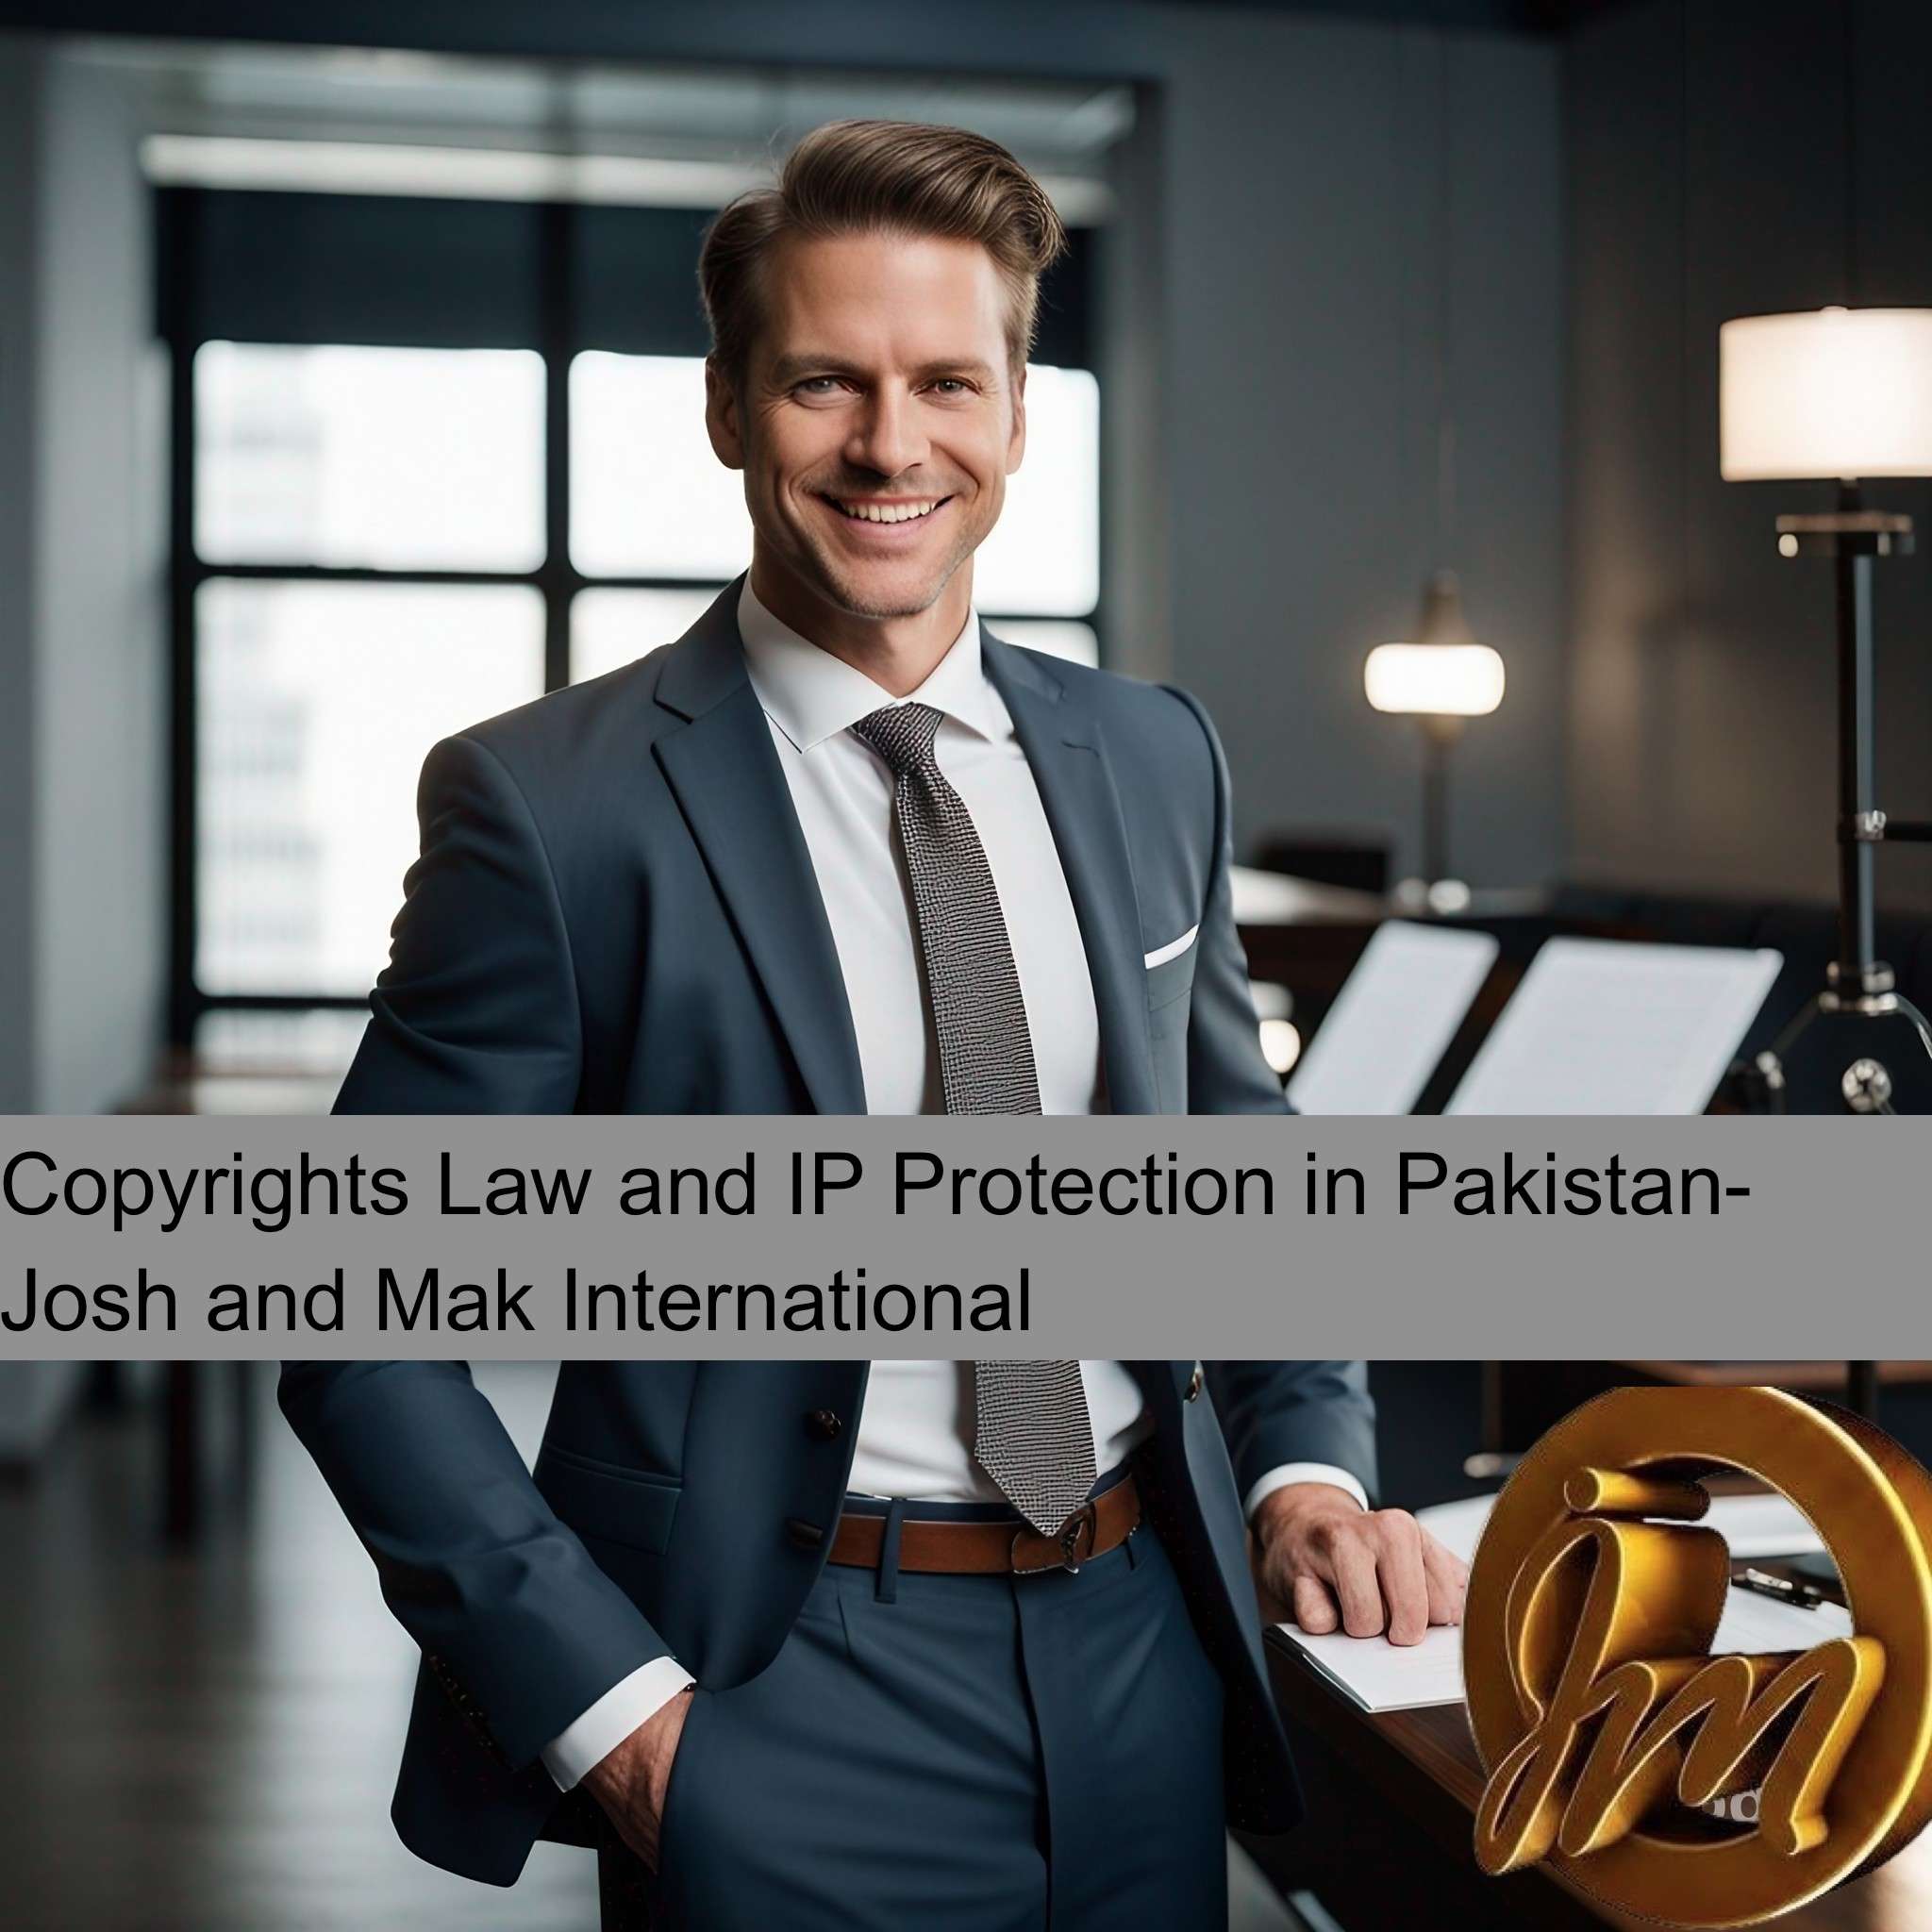 Copyrights Law and IP Protection in Pakistan- Josh and Mak International